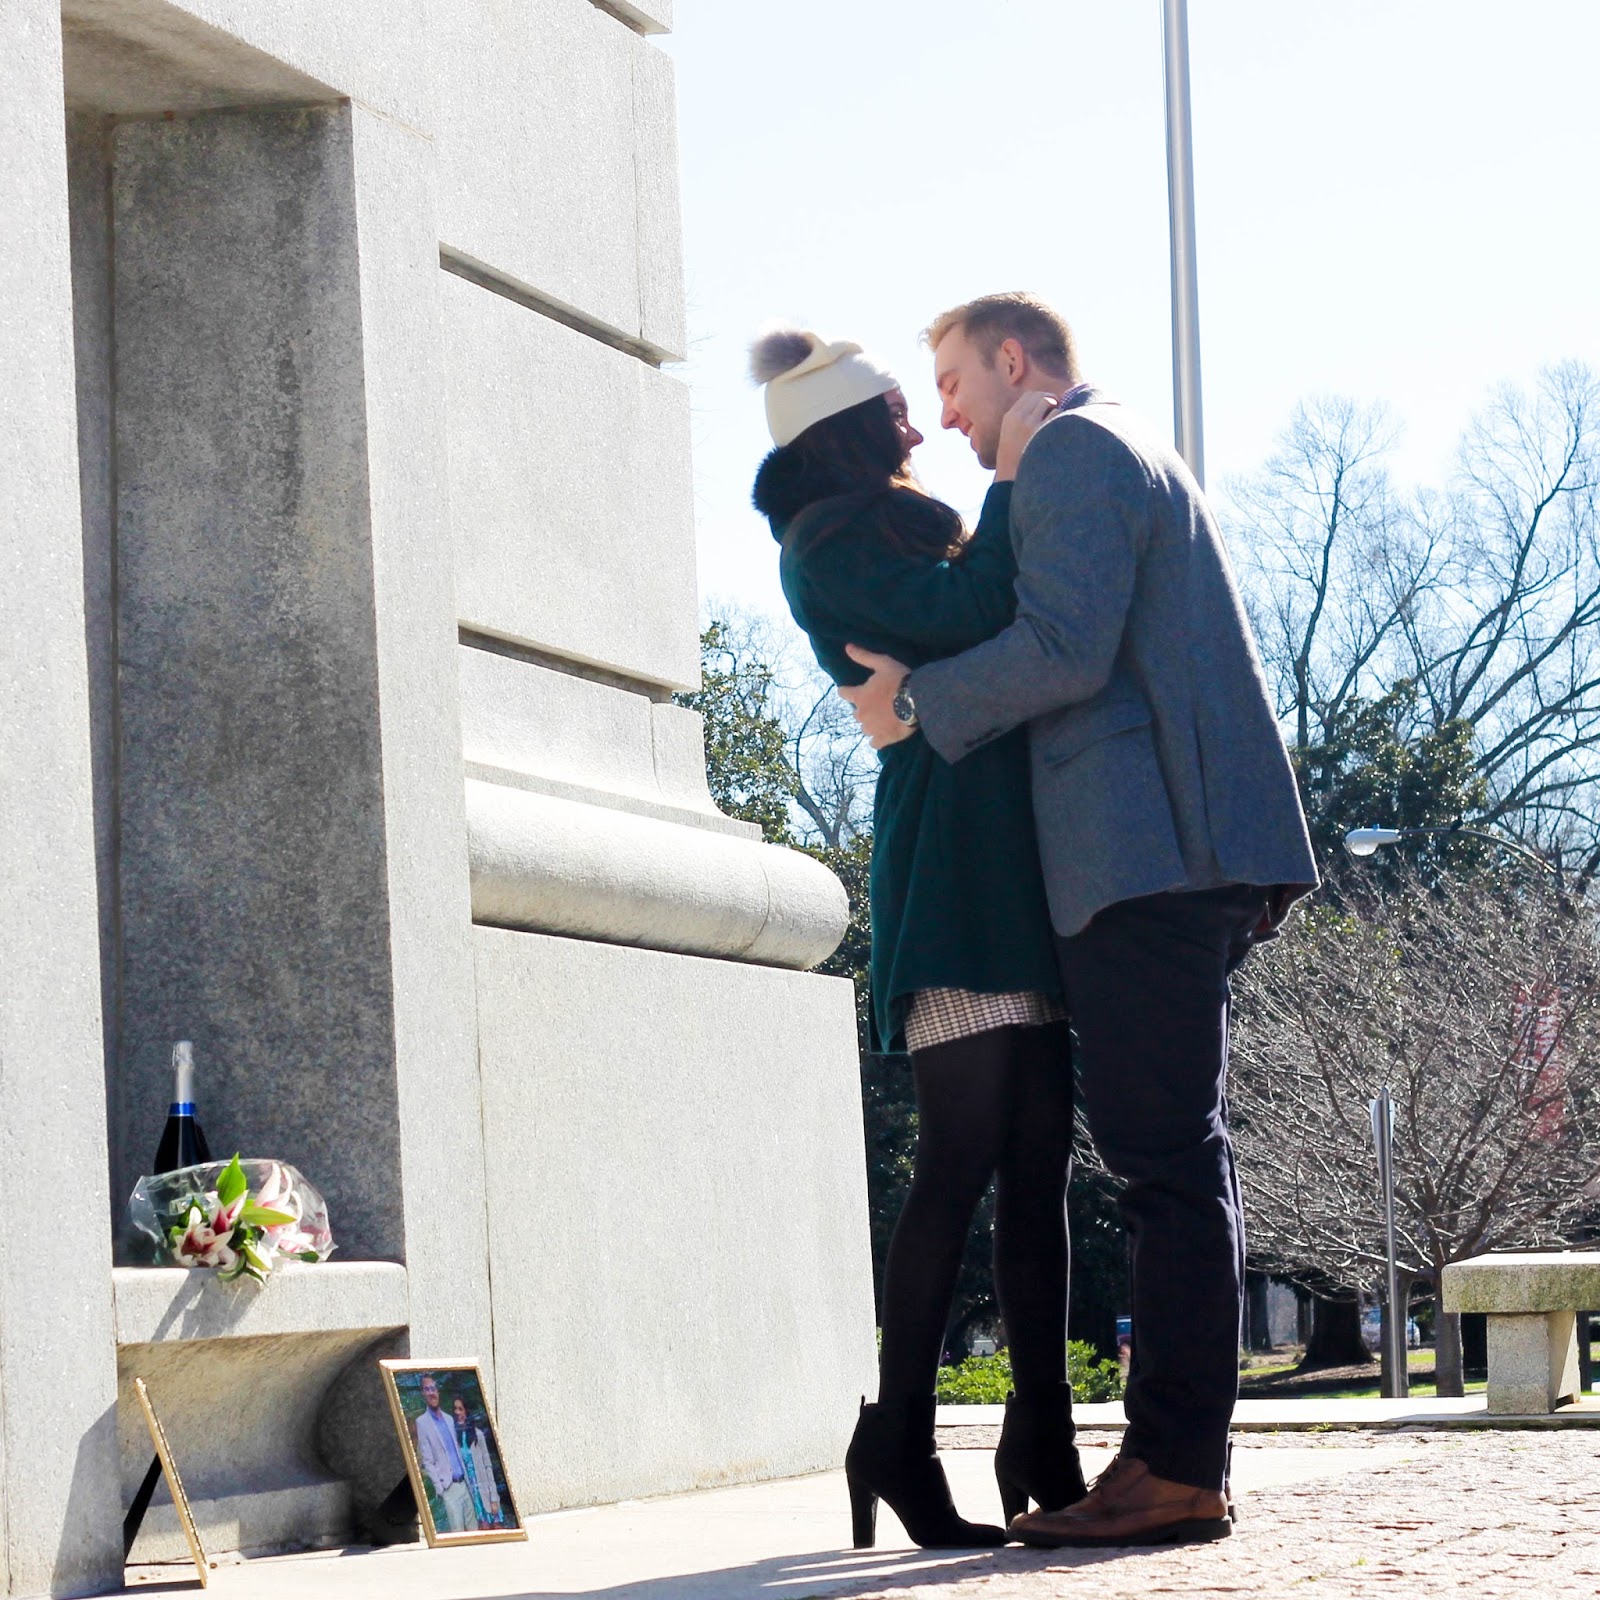 NC State Bell Tower Photos, NC State Bell Tower Photography Ideas, NC State Proposal, NC State engagement, nc state couple, pretty in the pines, fashion blogger, blogger bride to be